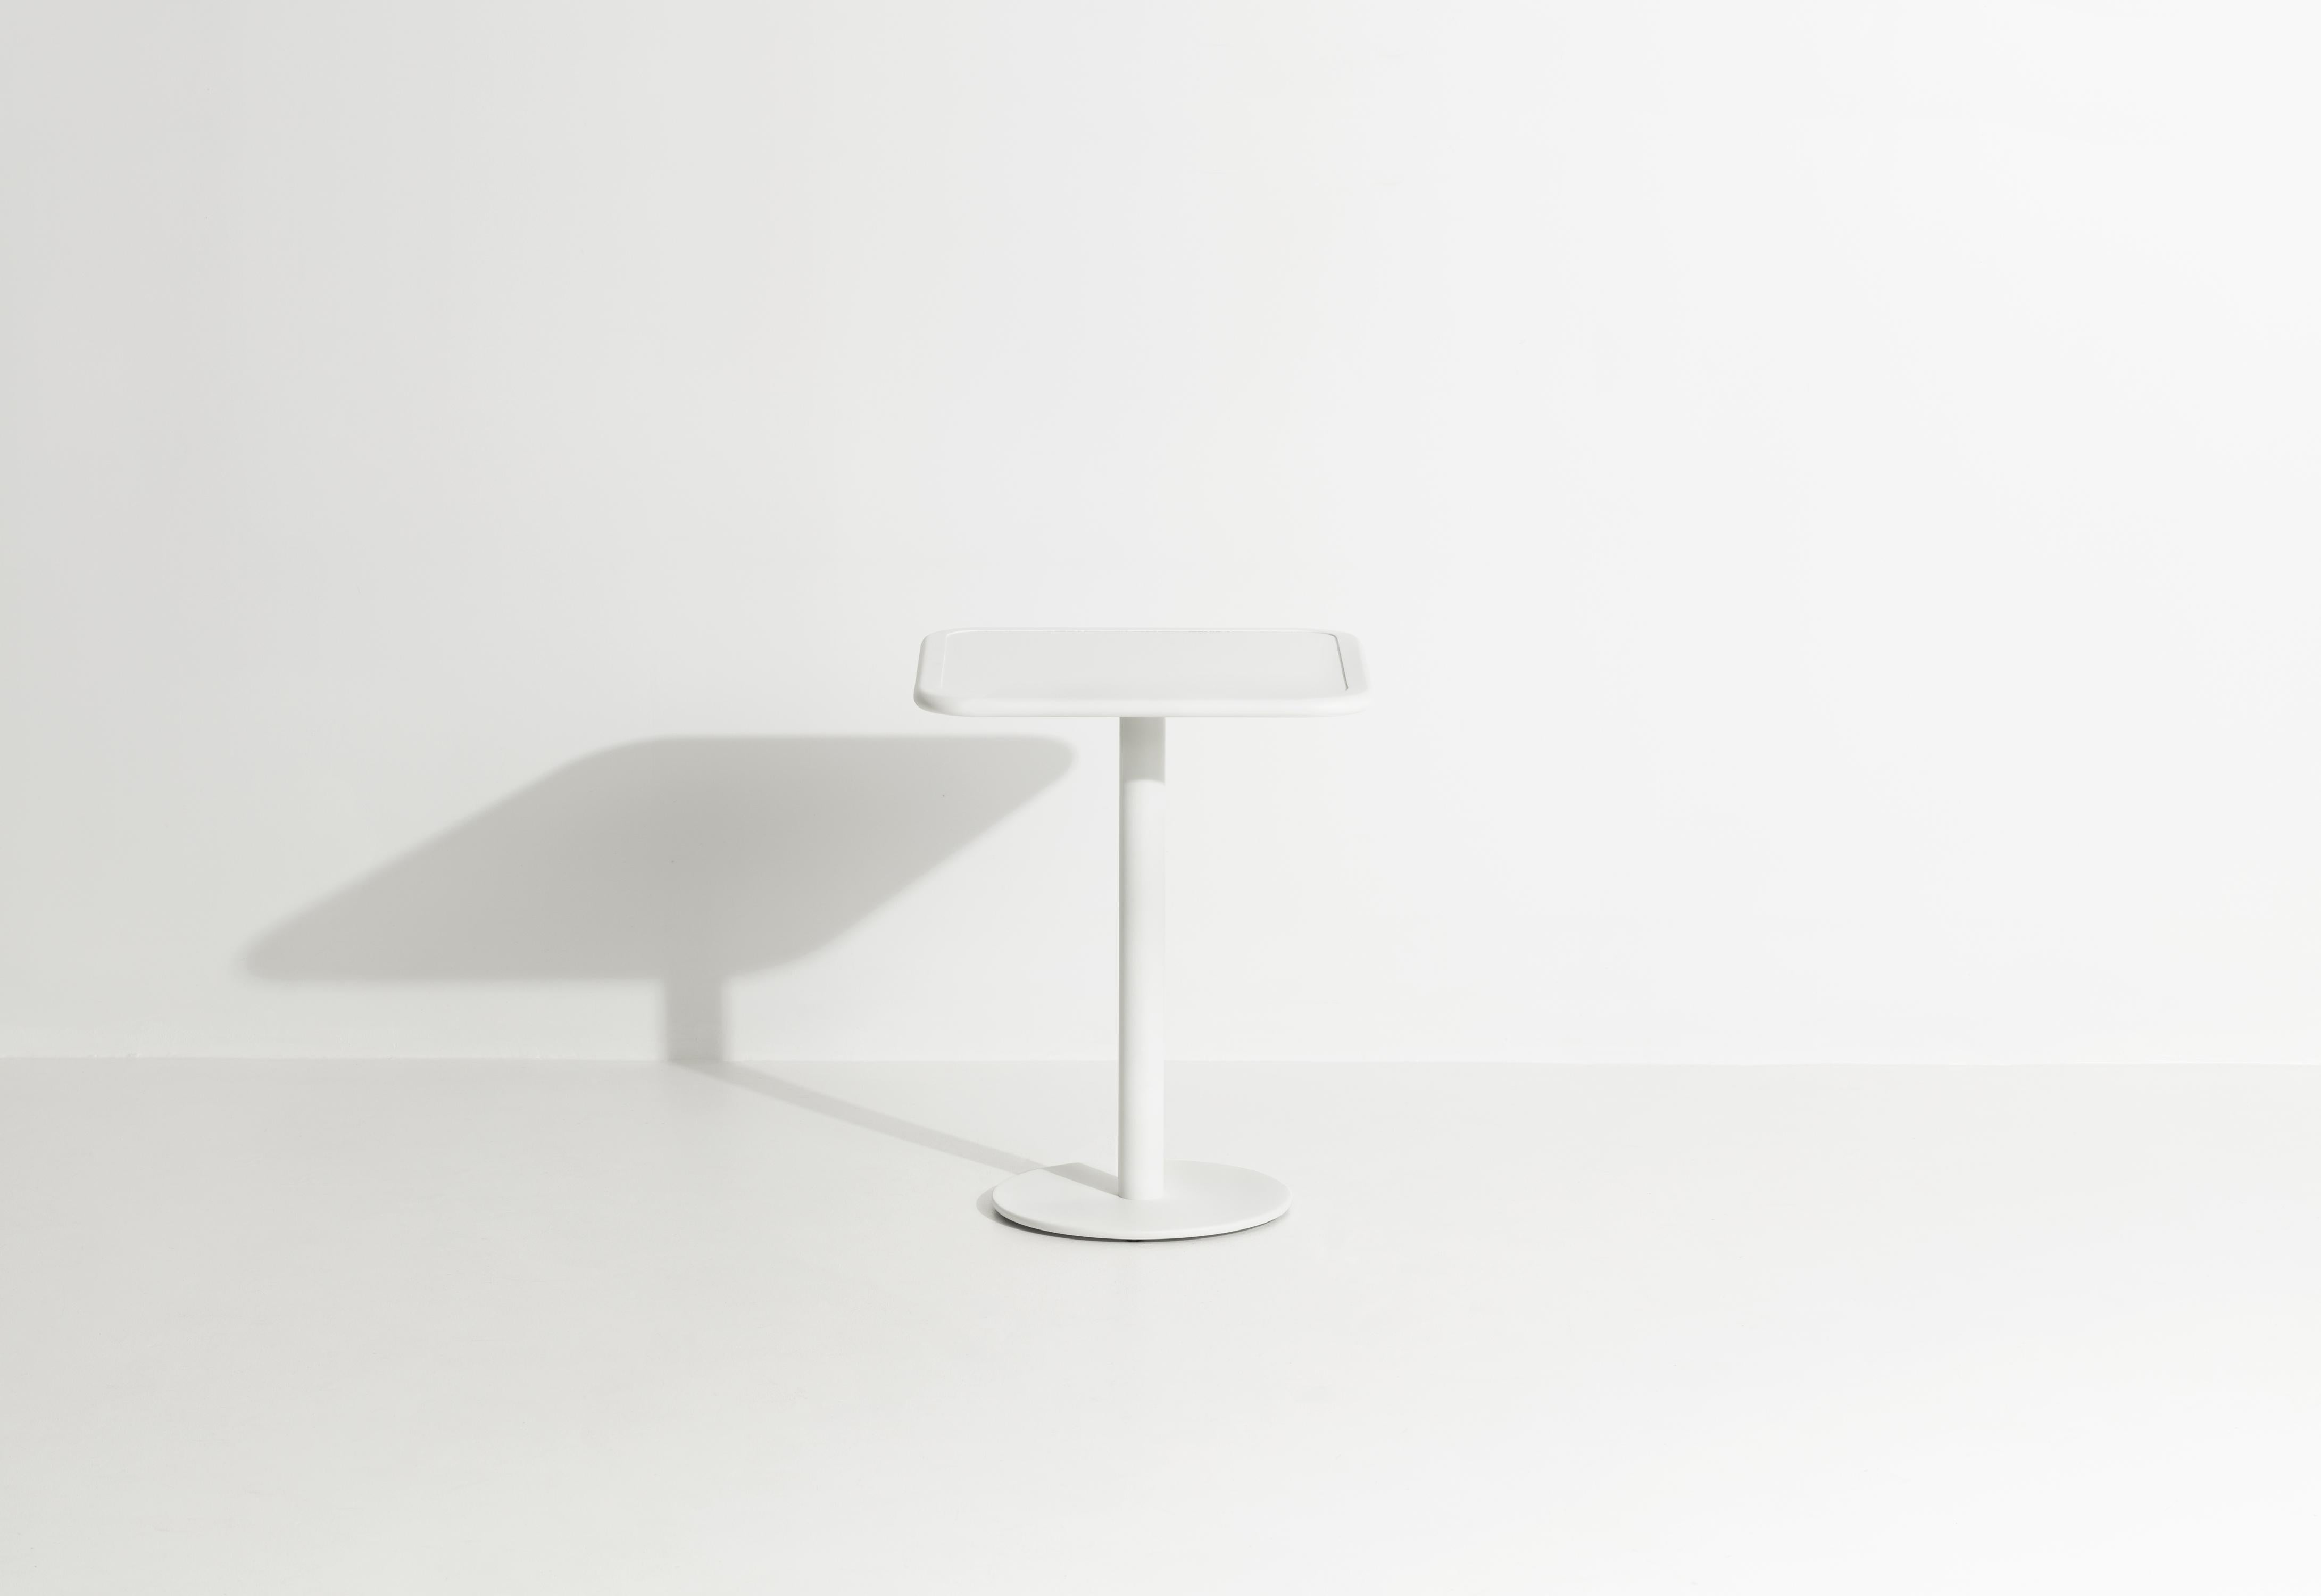 Petite Friture Week-End Bistro Square Dining Table in White Aluminium, 2017 In New Condition For Sale In Brooklyn, NY